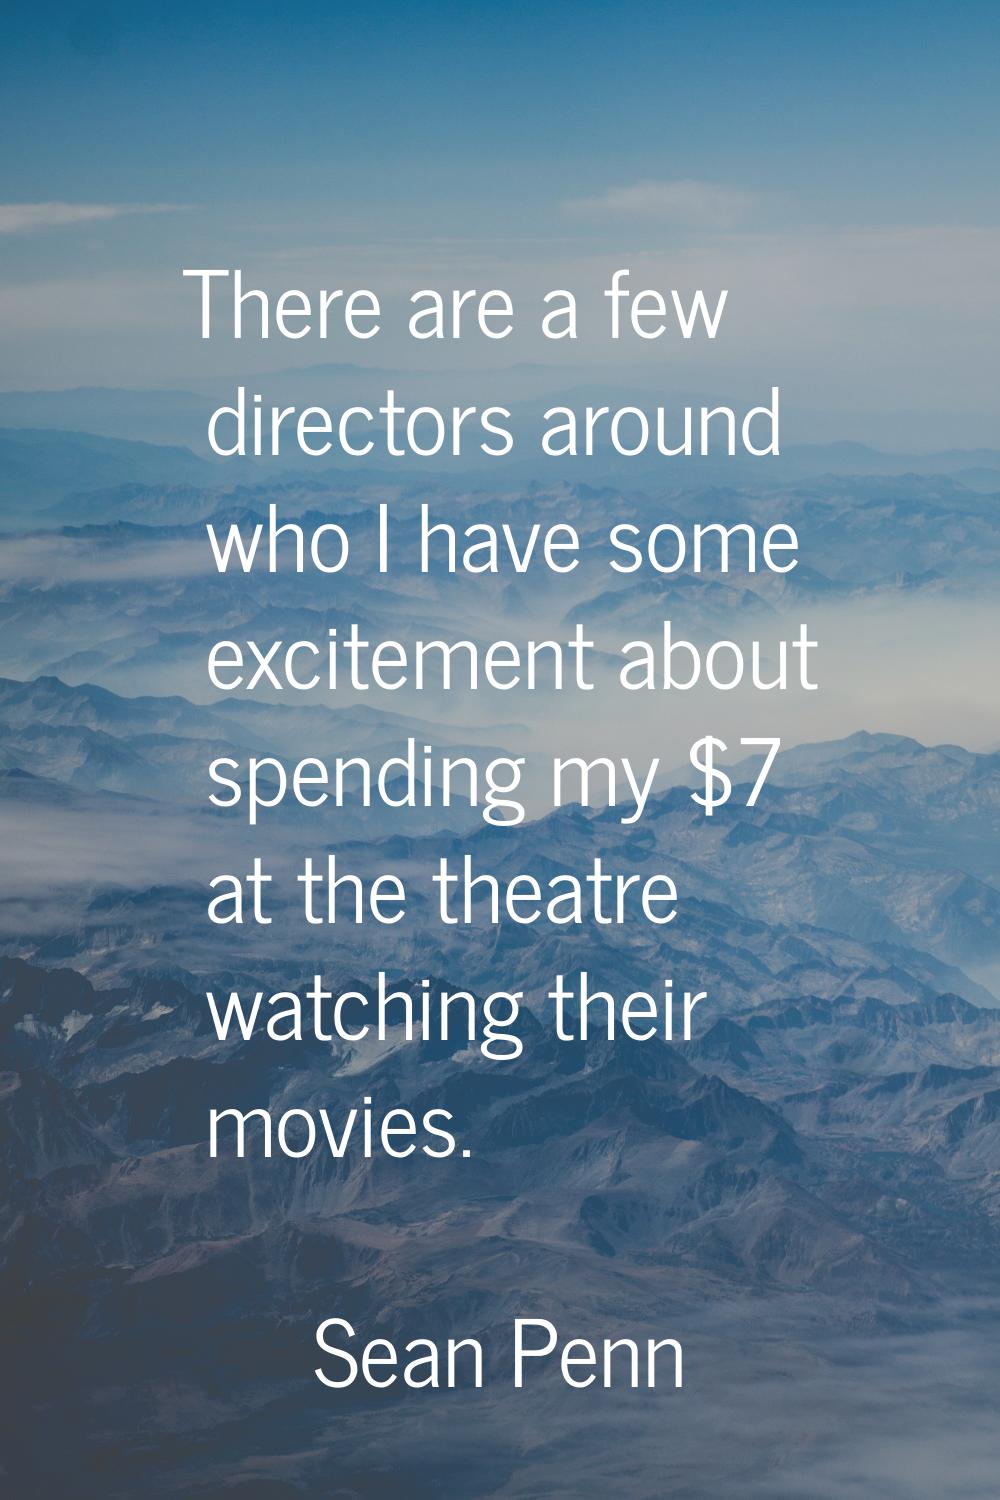 There are a few directors around who I have some excitement about spending my $7 at the theatre wat